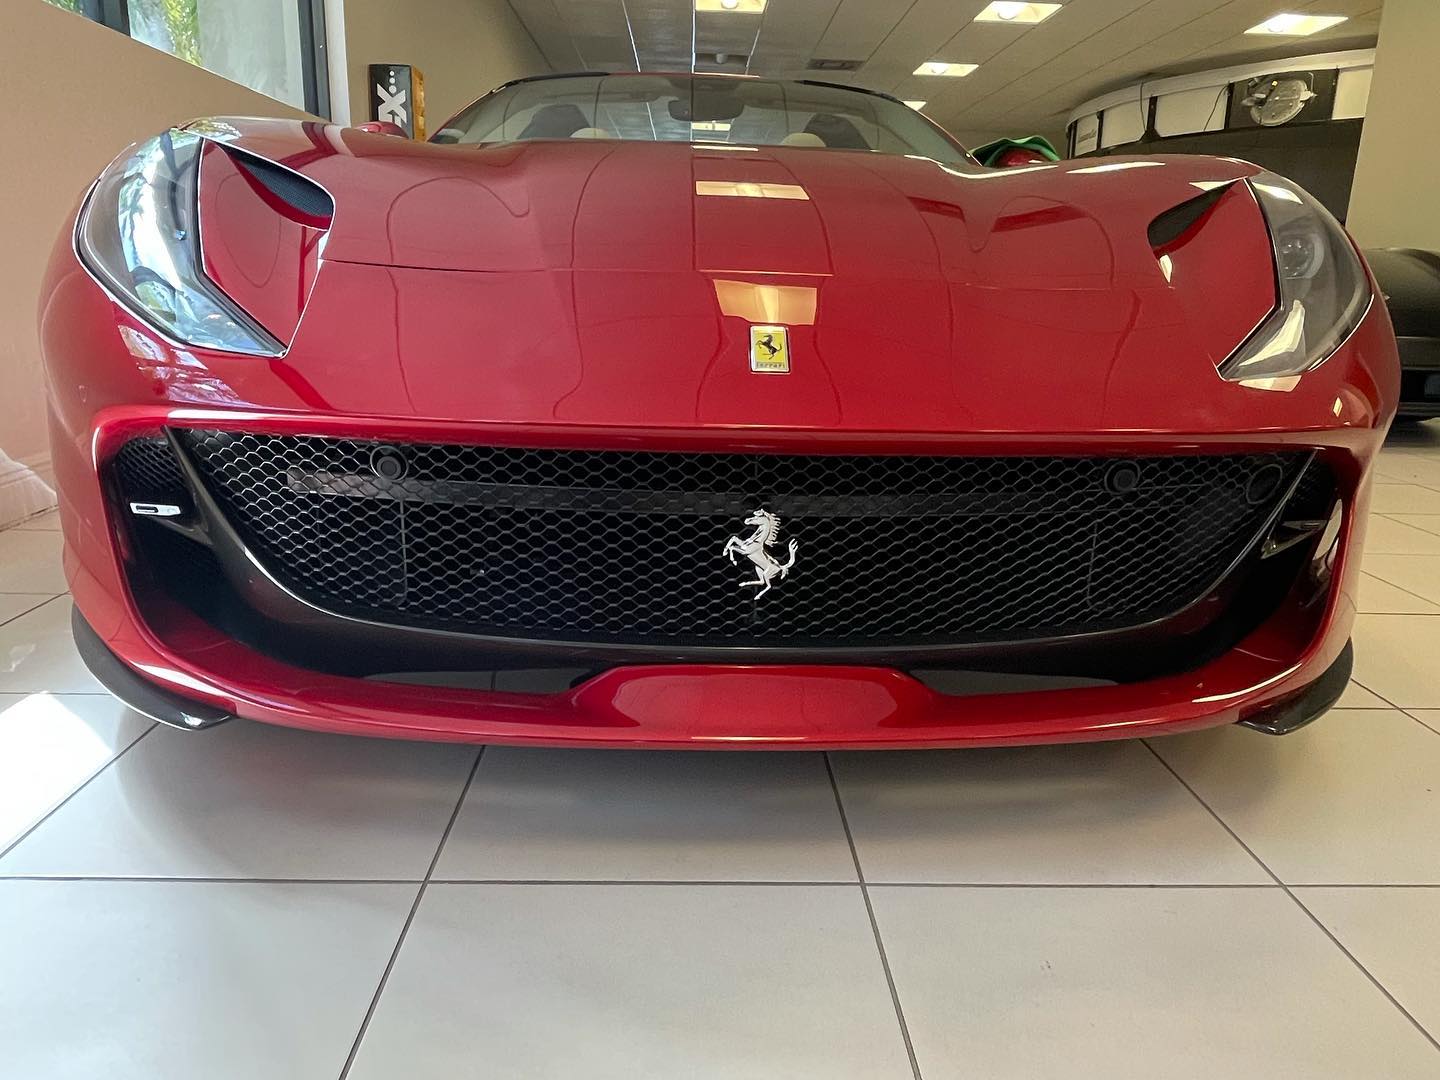 front k40 laser jammers on a 2021 ferrari gts